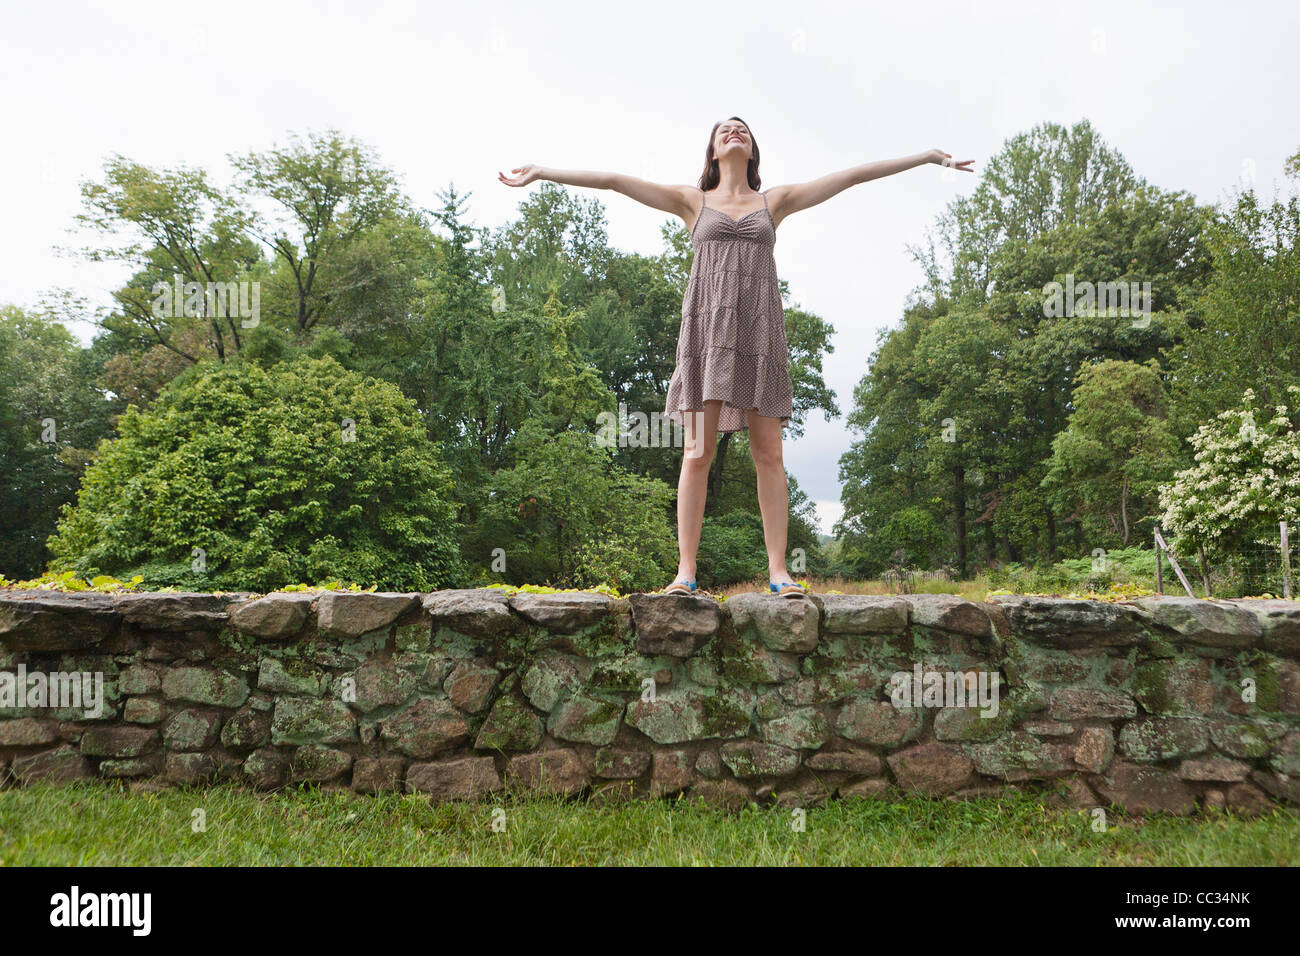 USA, New Jersey, Happy woman standing on stone wall on field Stock Photo